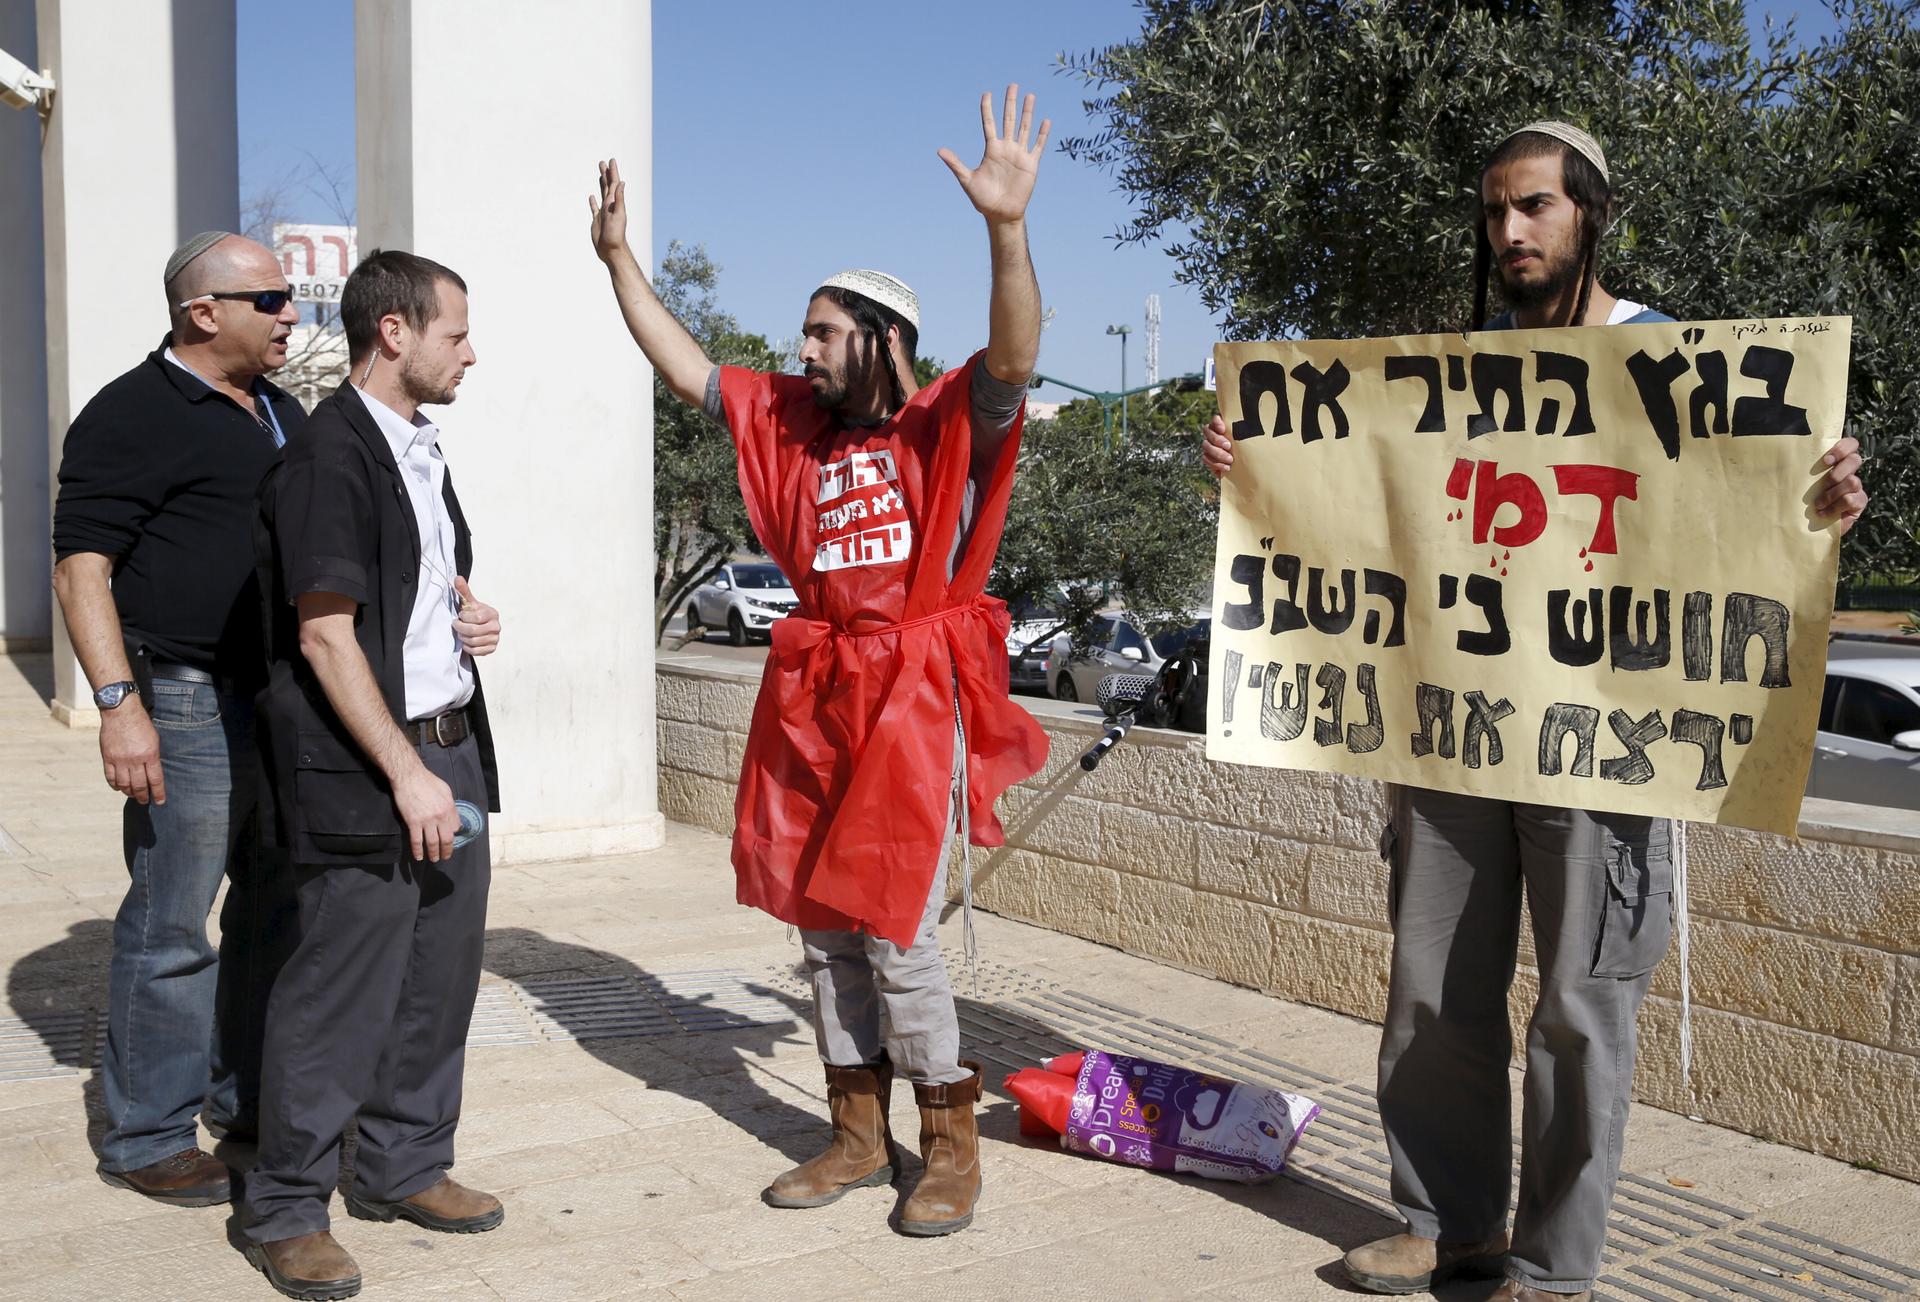 Israeli ultranationalists (right) protest against alleged interrogation methods used by Israel's domestic security service Shin Bet on suspects in a fatal arson attack last July in a Palestinian West Bank village, during a court hearing in the case held o